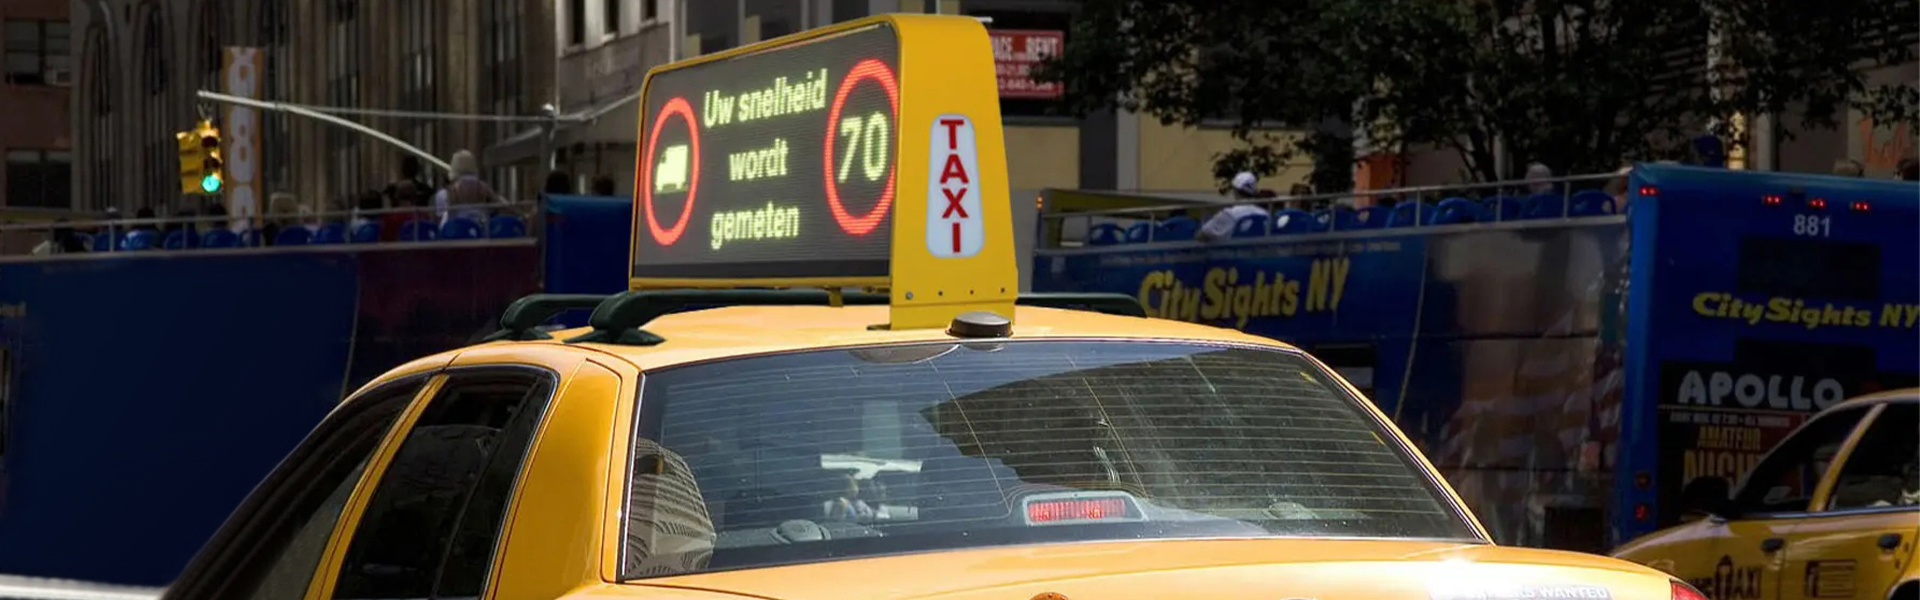 taxi top LED screen application